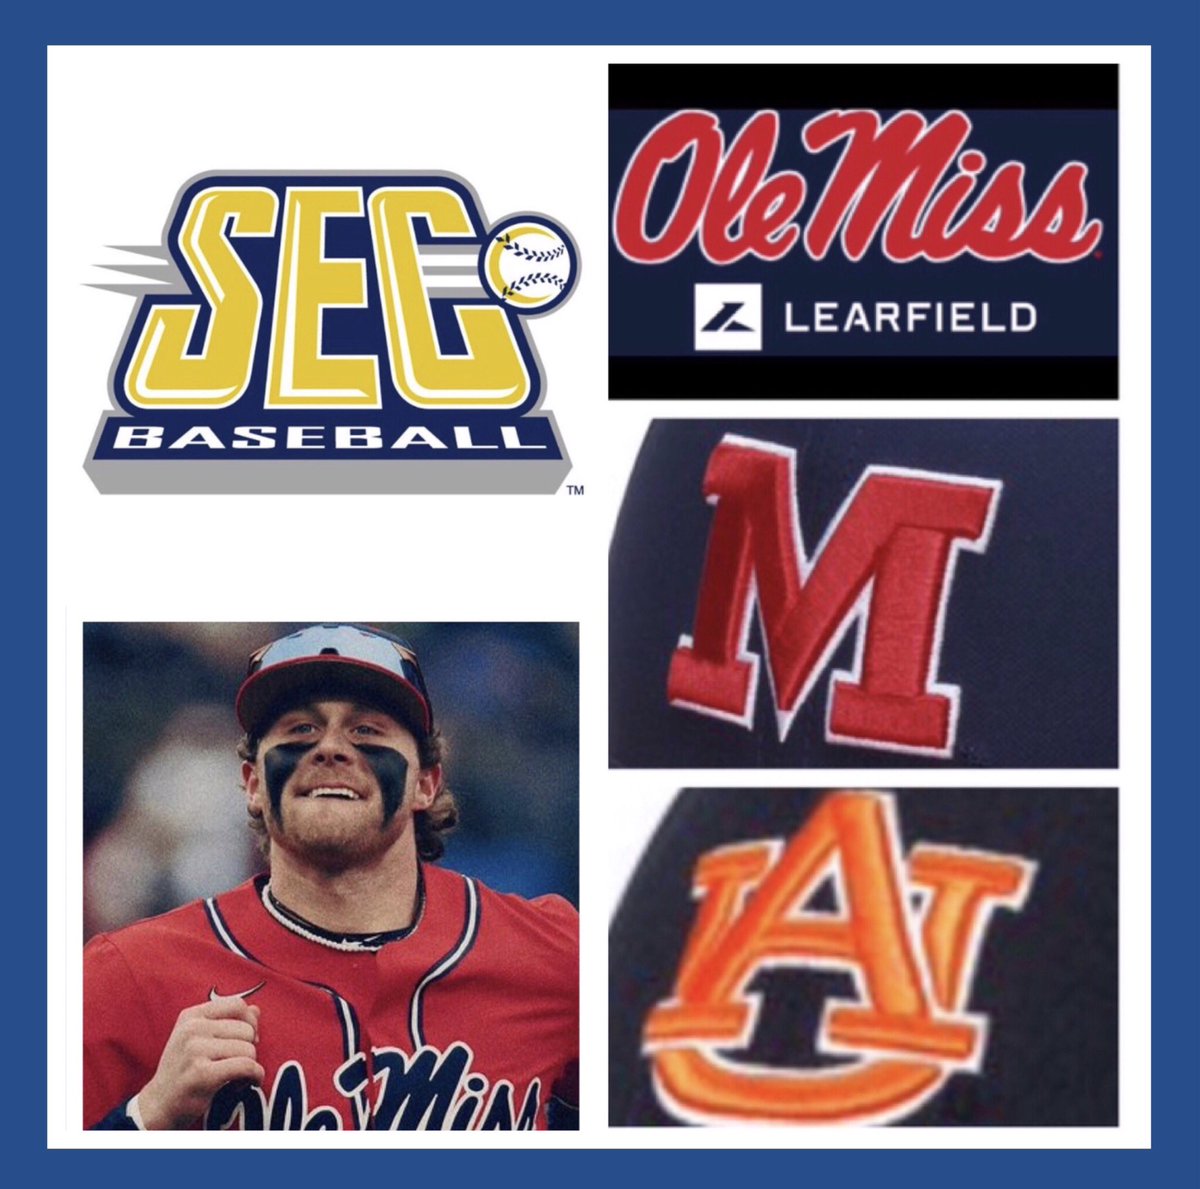 Tonight @OleMissBSB is in Auburn for game one vs the Tigers. 1st pitch is 6pm…airtime on the @OleMissNetwork 5:30pm w/@RebVoice & @HenduReb! Listen 🎧⬇️ 📻 Local radio olemisssports.com/sports/2018/7/… 📱 @OleMissSports app 💻 online olemisssports.com/watch?Live=992…